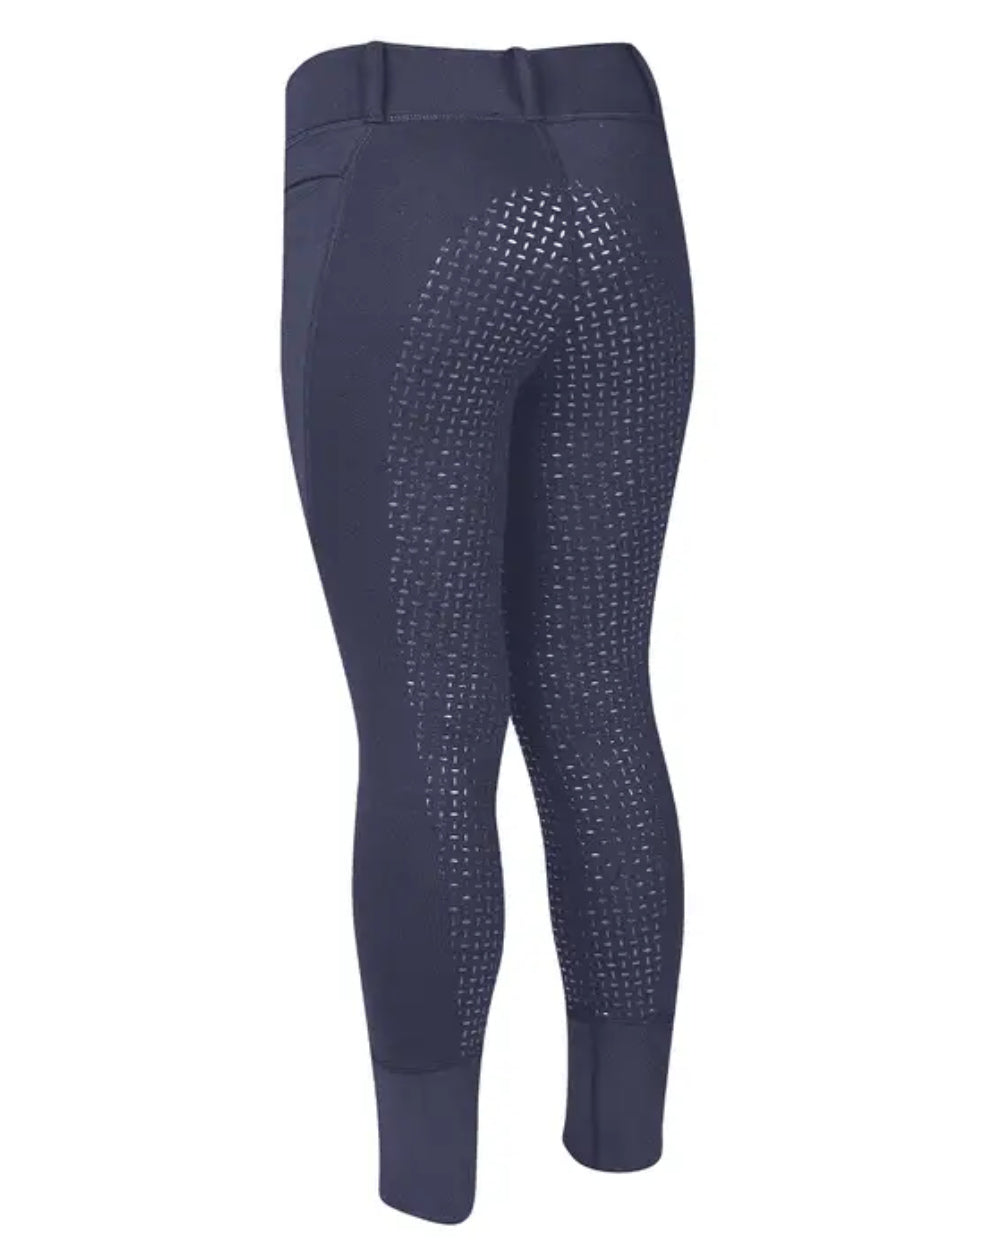 True Navy Coloured Dublin Childrens Cool It Everyday Riding Tights On A White Background 